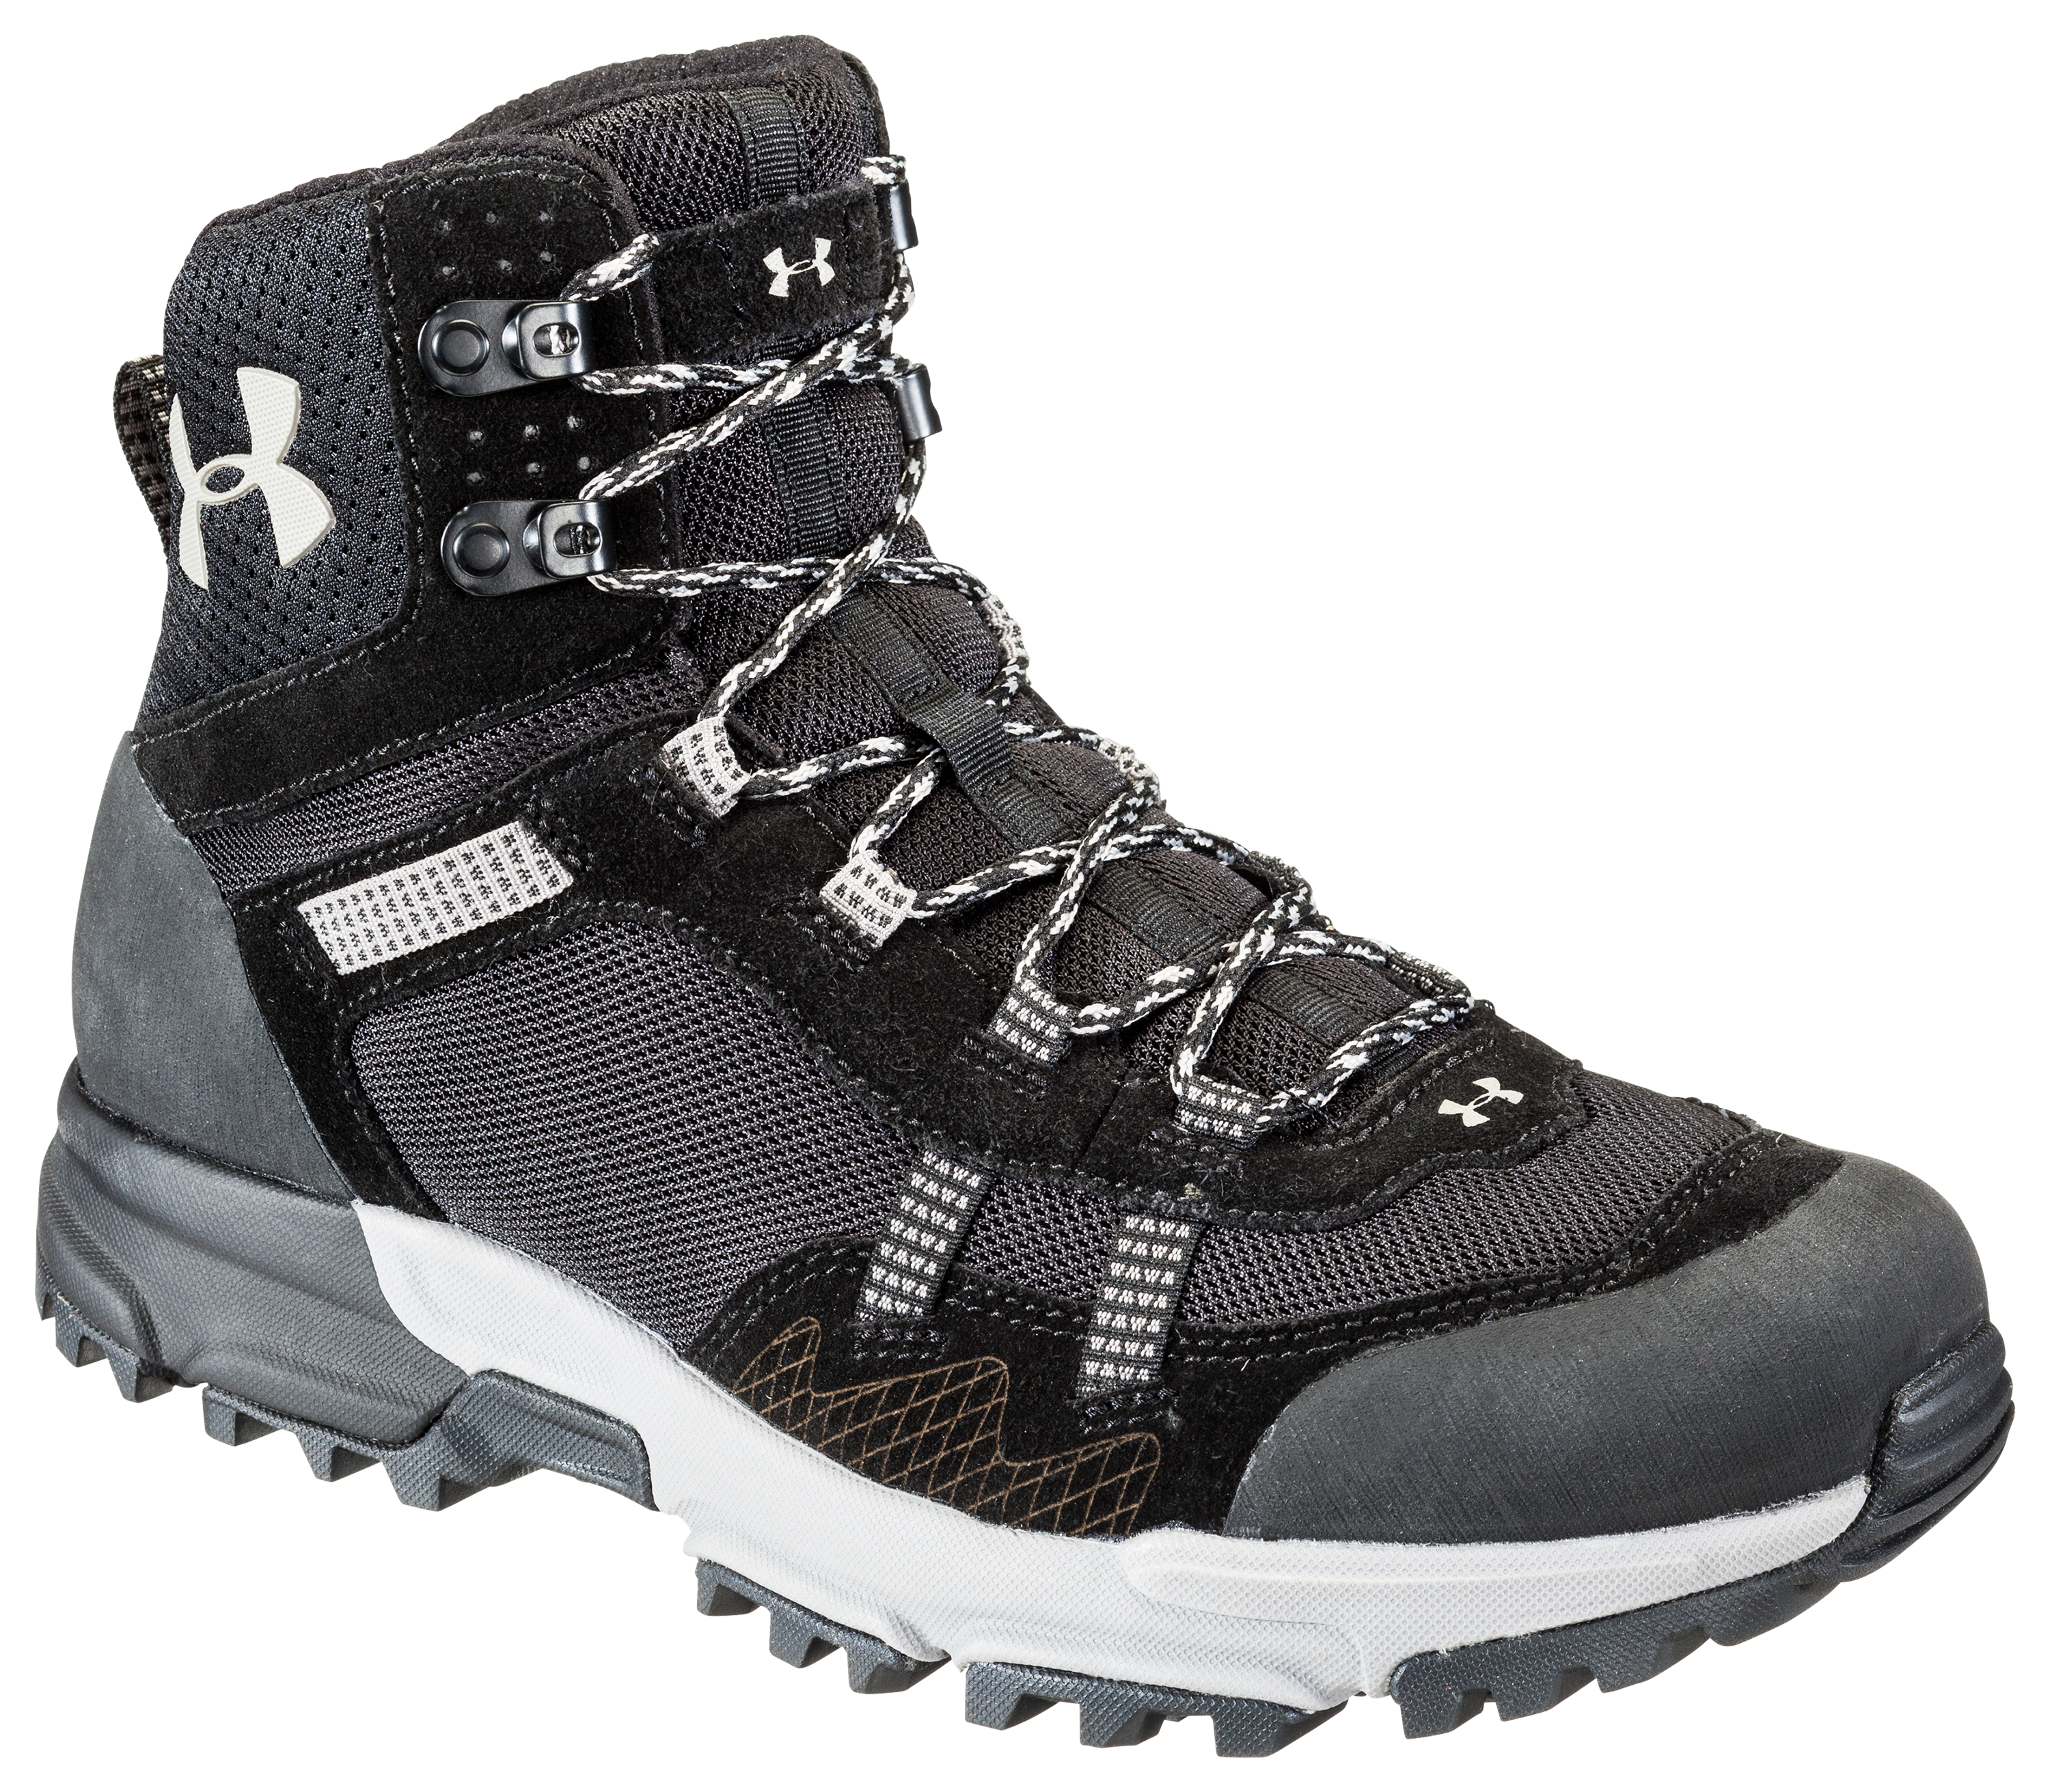 Under Armour Post Canyon Mid 2.0 Hiking Boots for Men | Bass Pro Shops